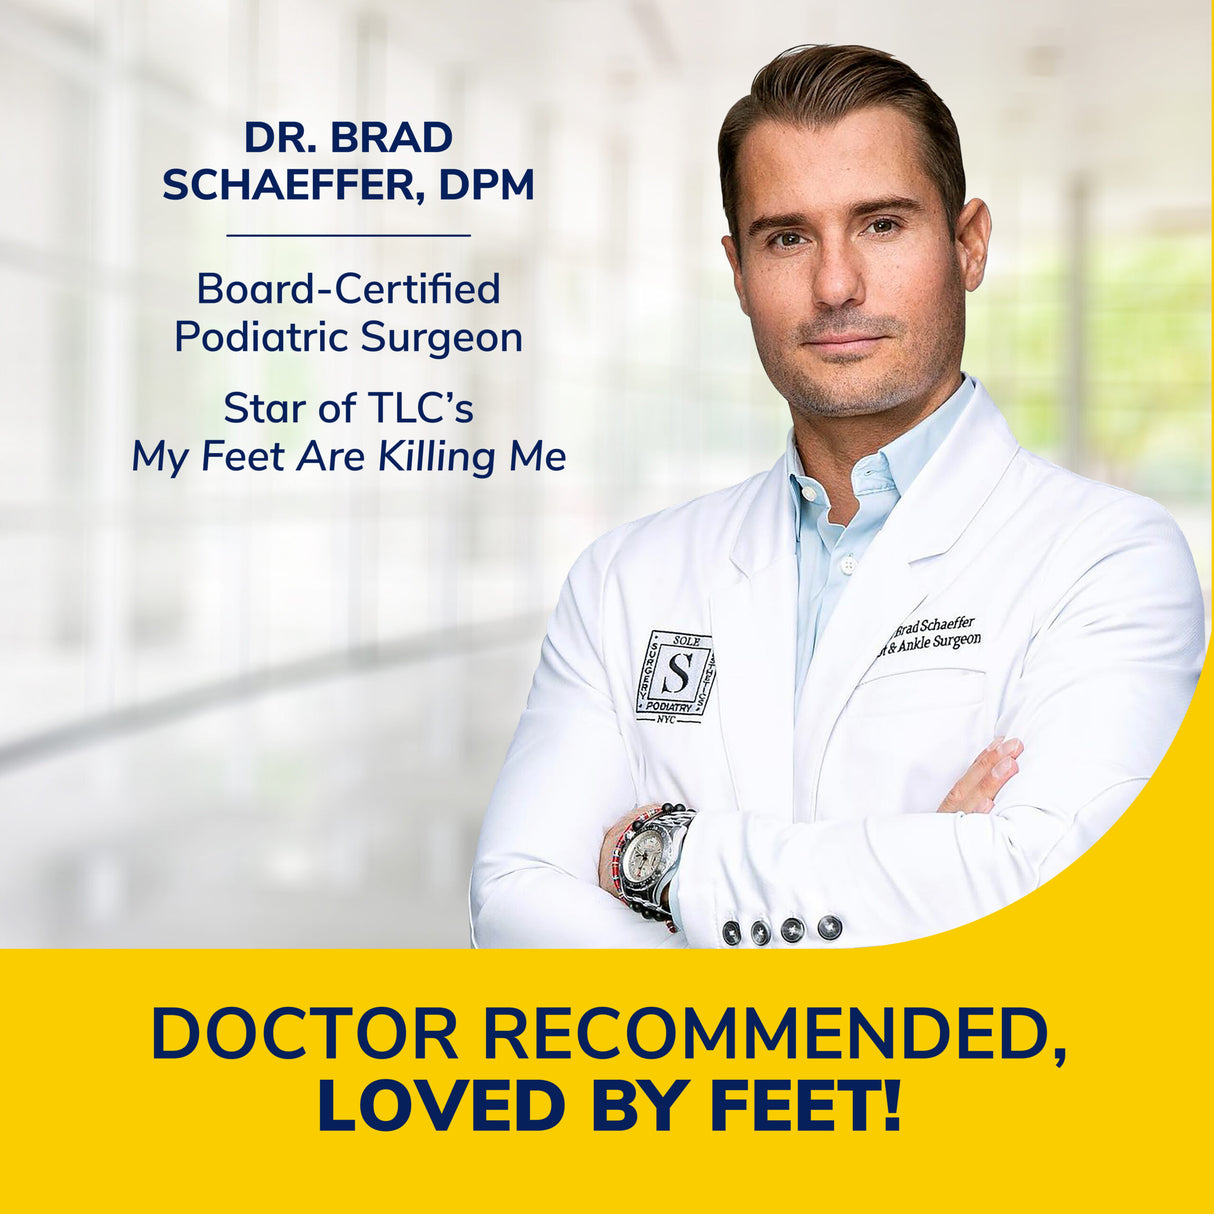 image of dr recommended loved by feet